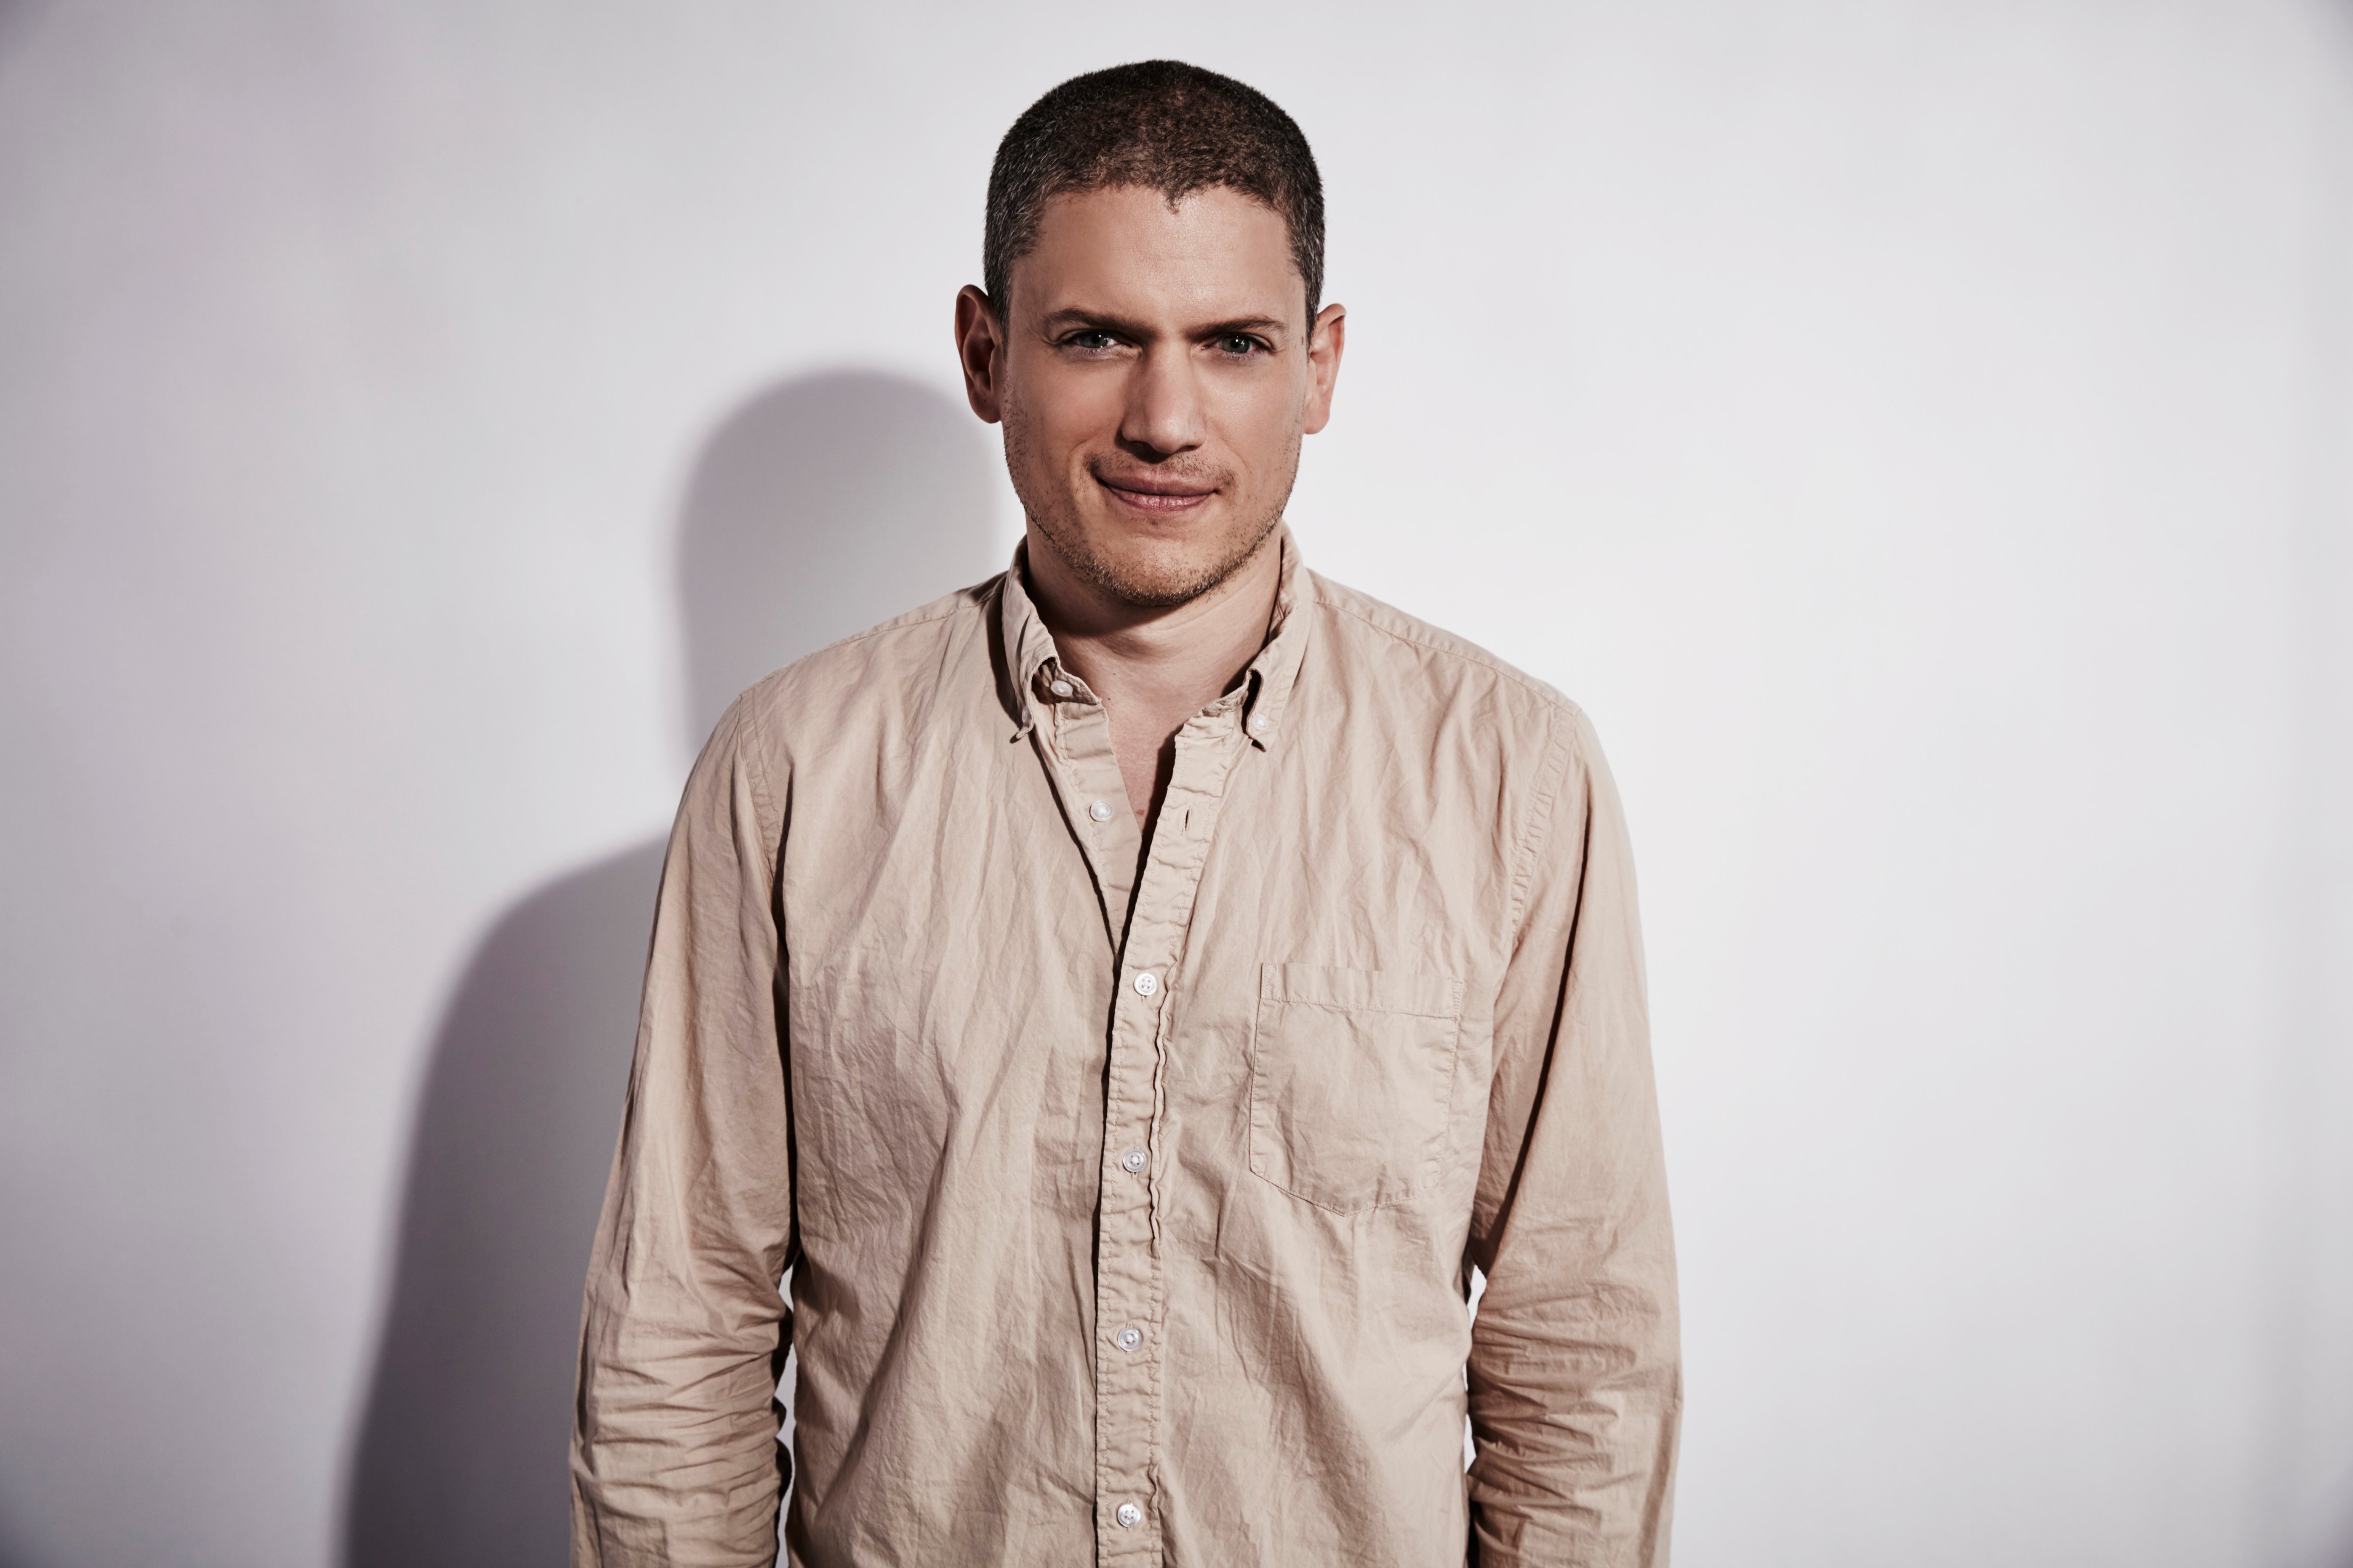 Actor Wentworth Miller of "Legends of Tomorrow" poses for a portrait at the Getty Images Portrait Studio Powered By Samsung Galaxy At Comic-Con International 2015 at Hard Rock Hotel San Diego on July 11, 2015 in San Diego, California. (Maarten de Boer/Getty Images)